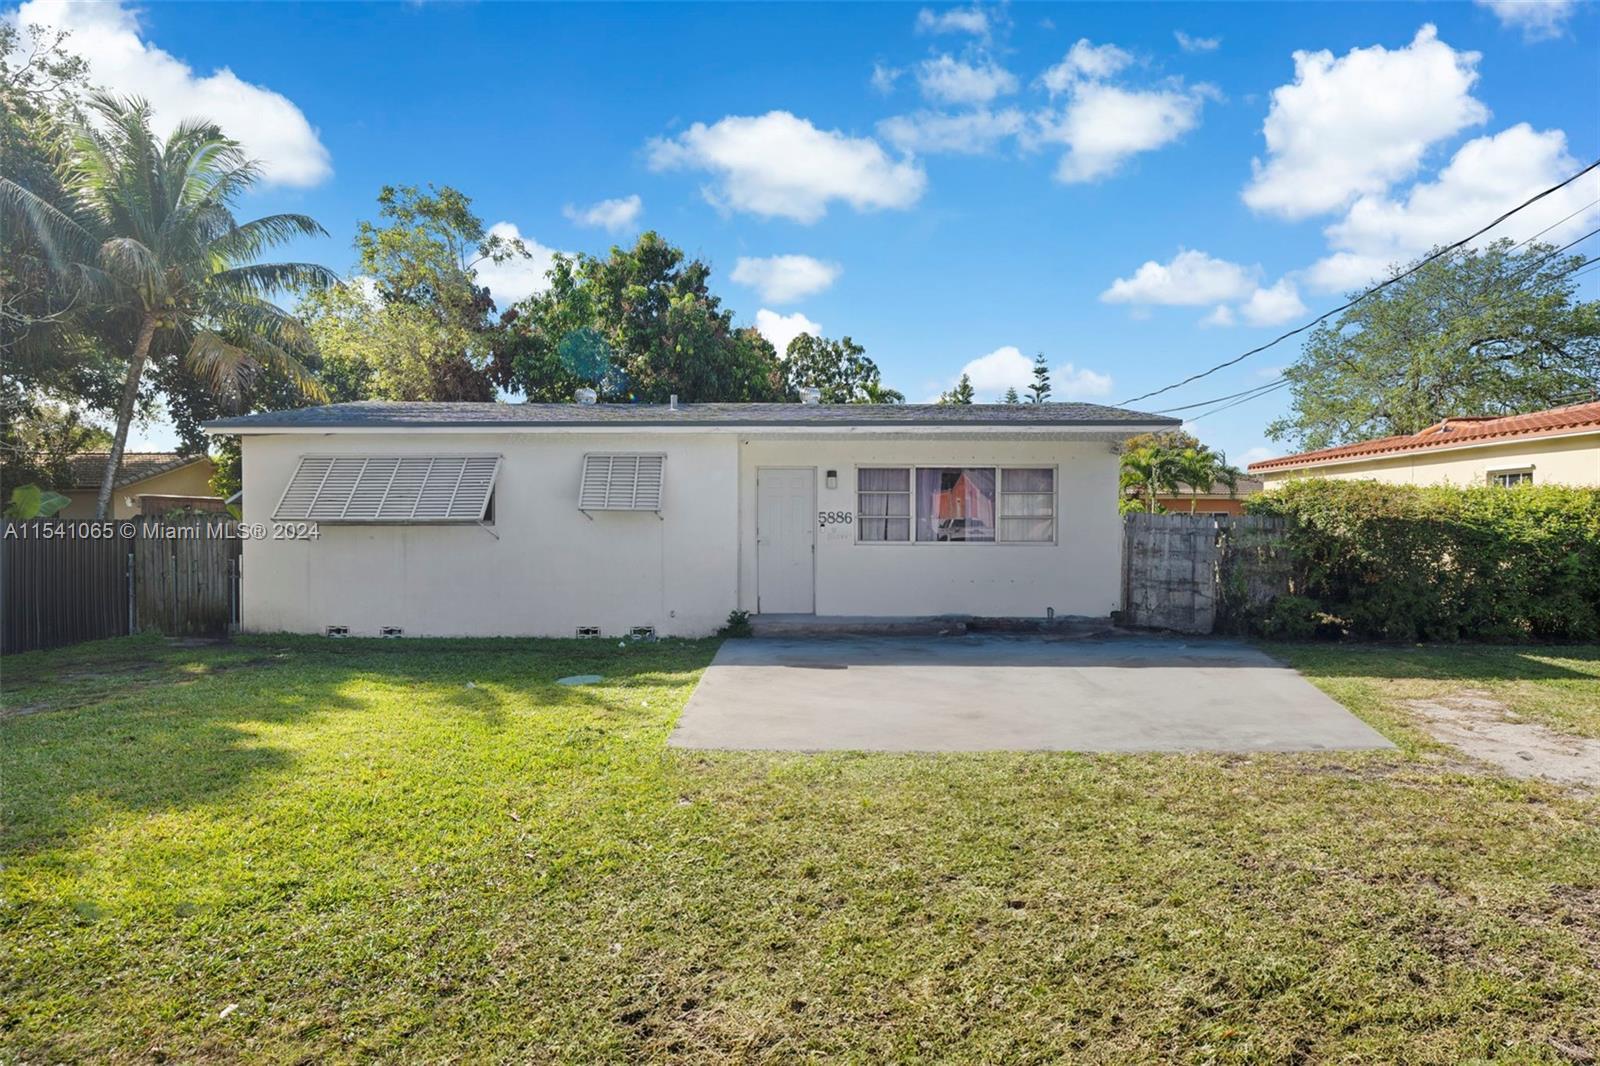 5886 20th St, Miami, Single Family Home,  for sale, One Stop Realty - Miami